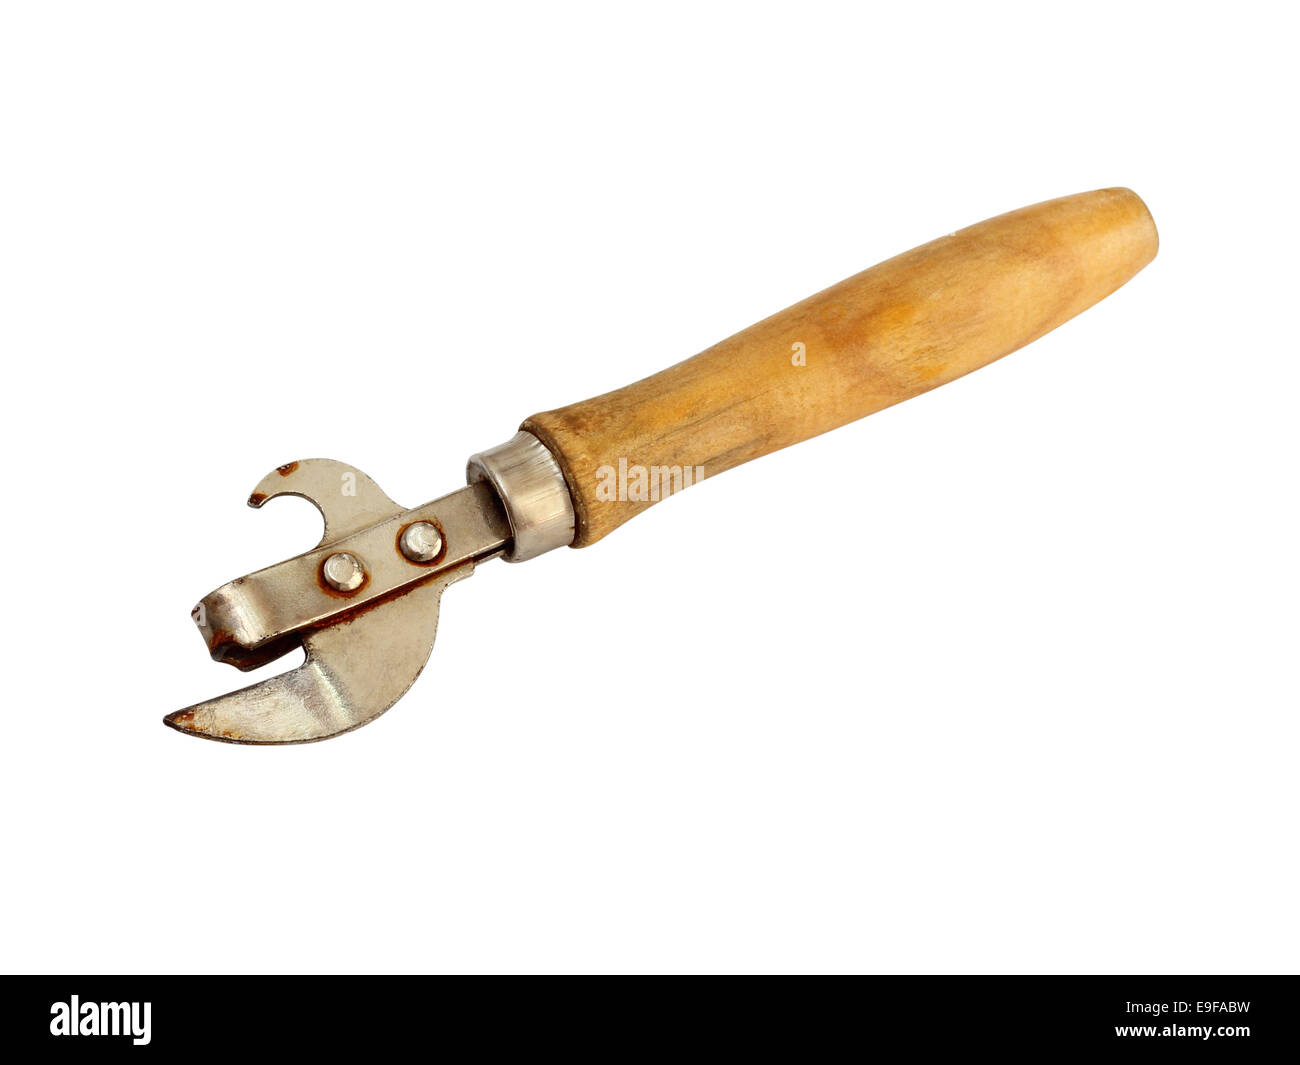 https://c8.alamy.com/comp/E9FABW/old-can-opener-with-wooden-handle-E9FABW.jpg